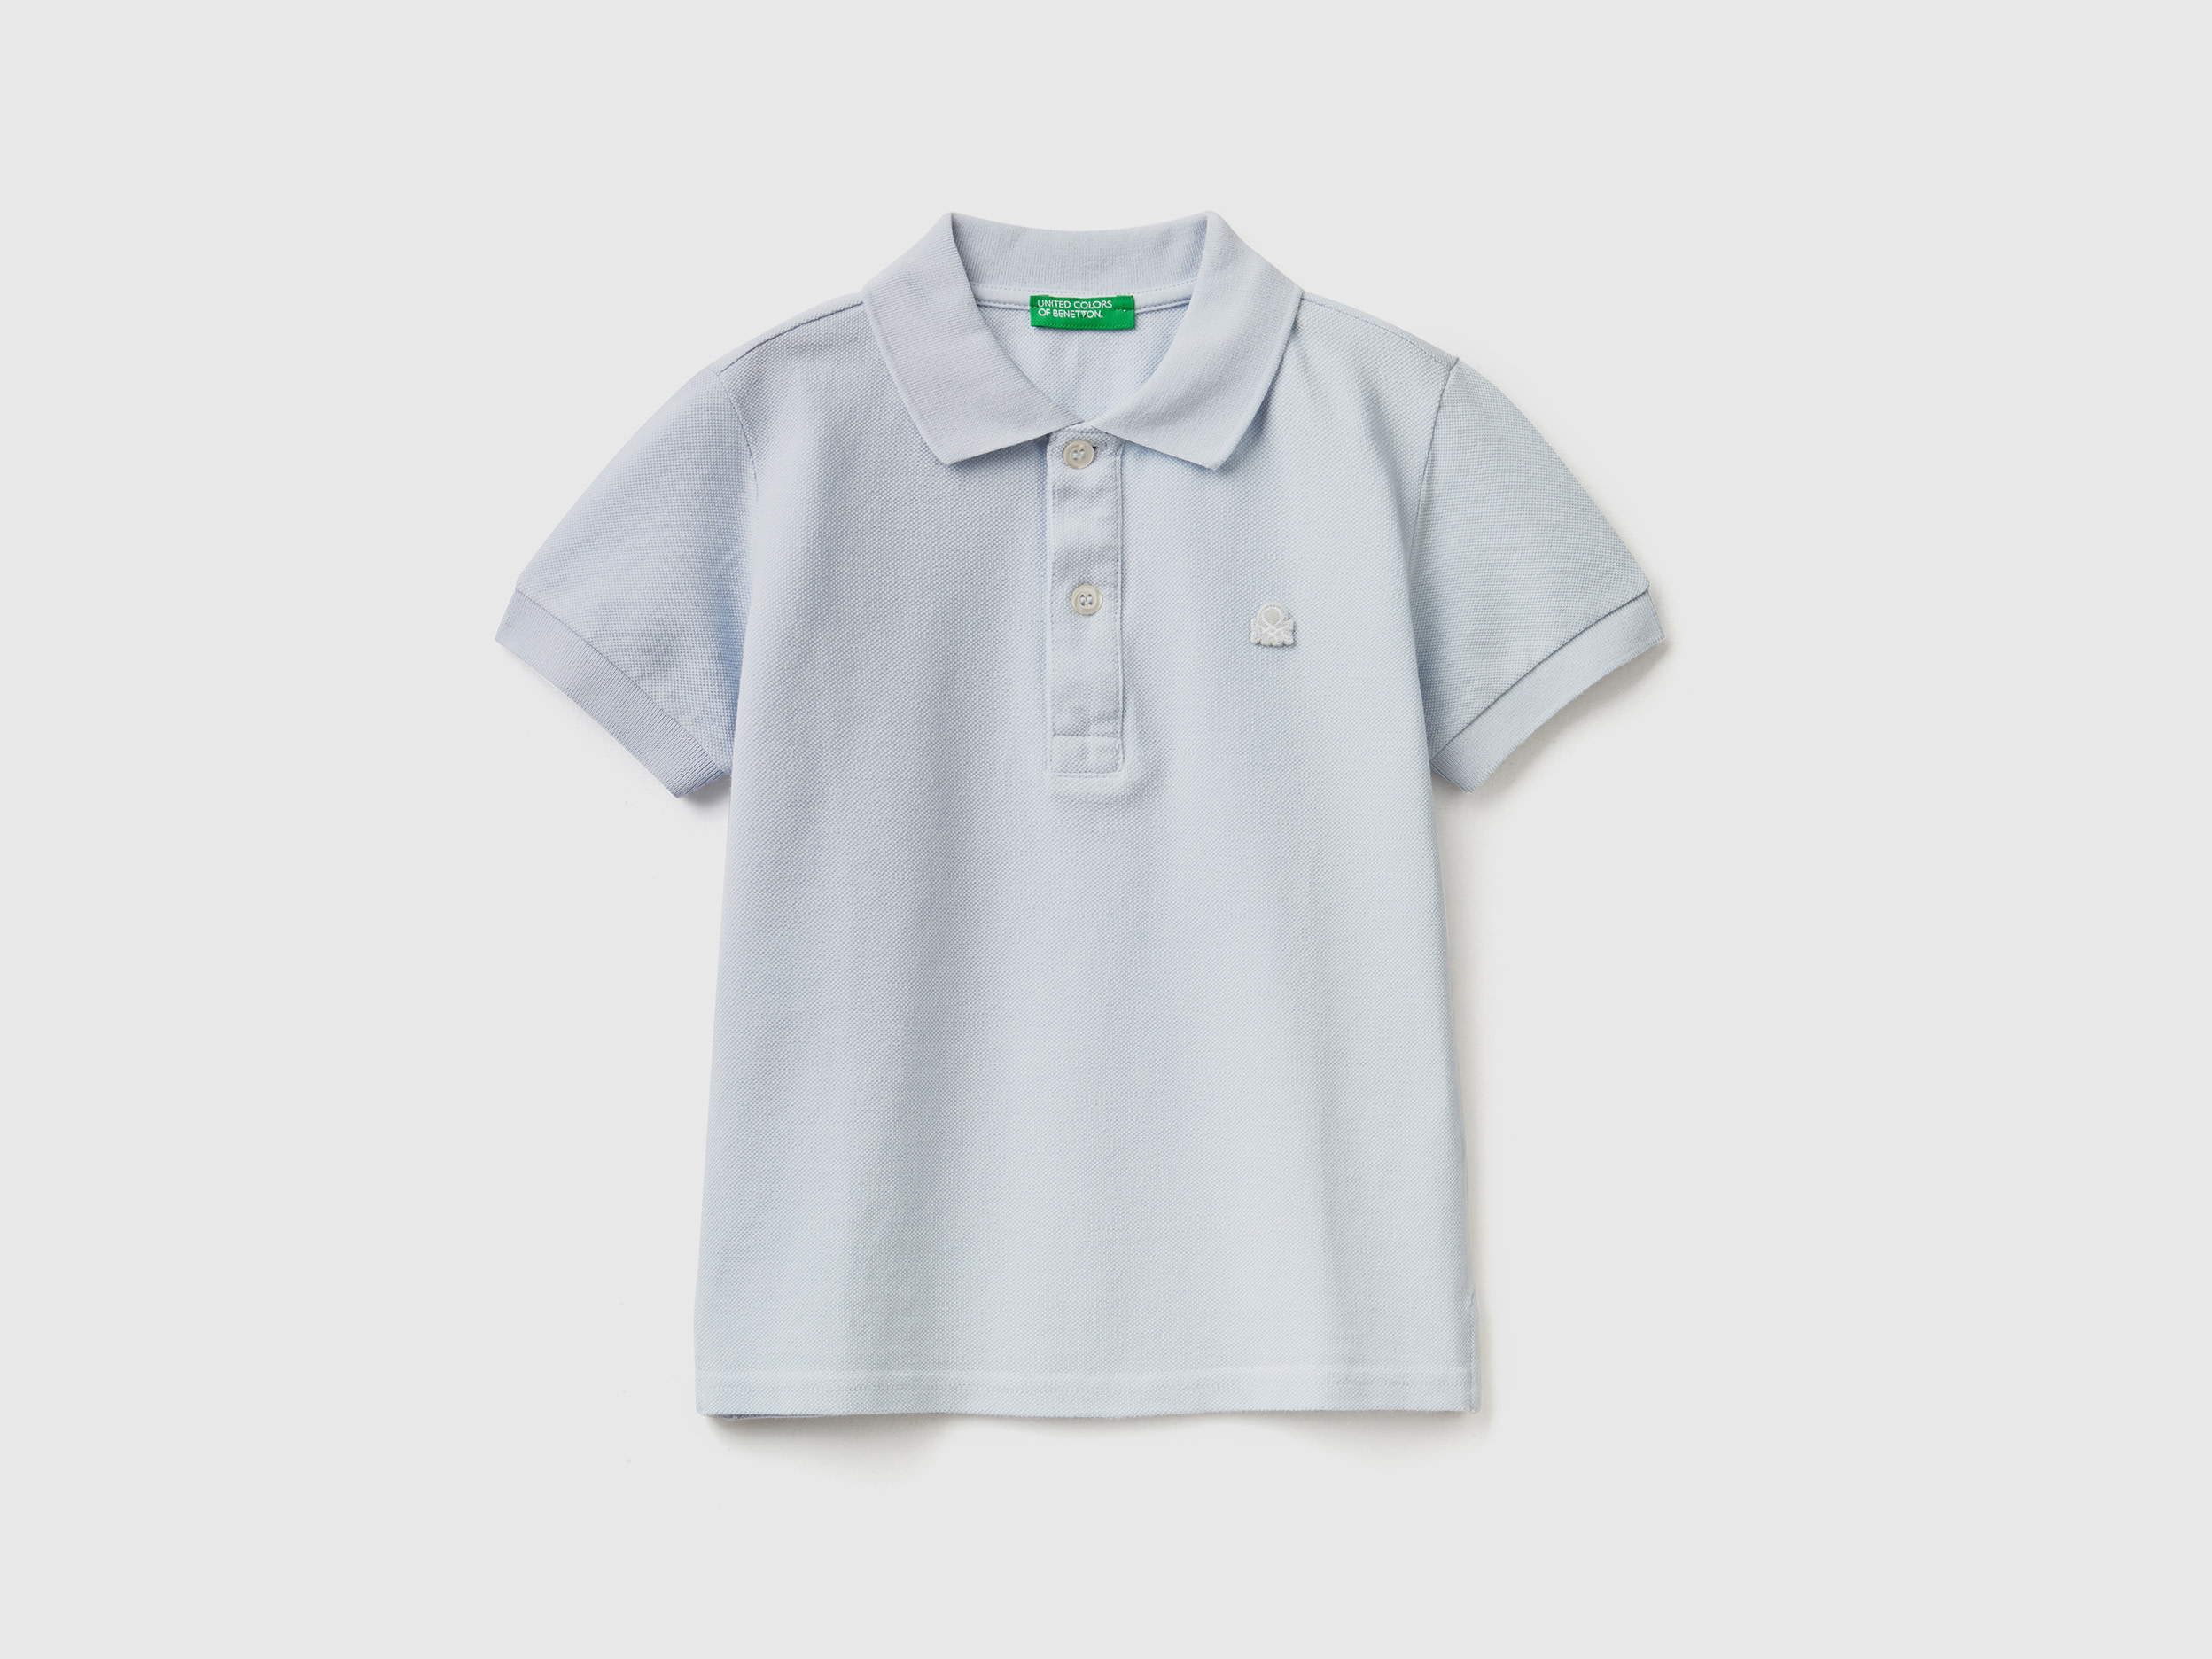 Image of Benetton, Short Sleeve Polo In Organic Cotton, size 98, Sky Blue, Kids